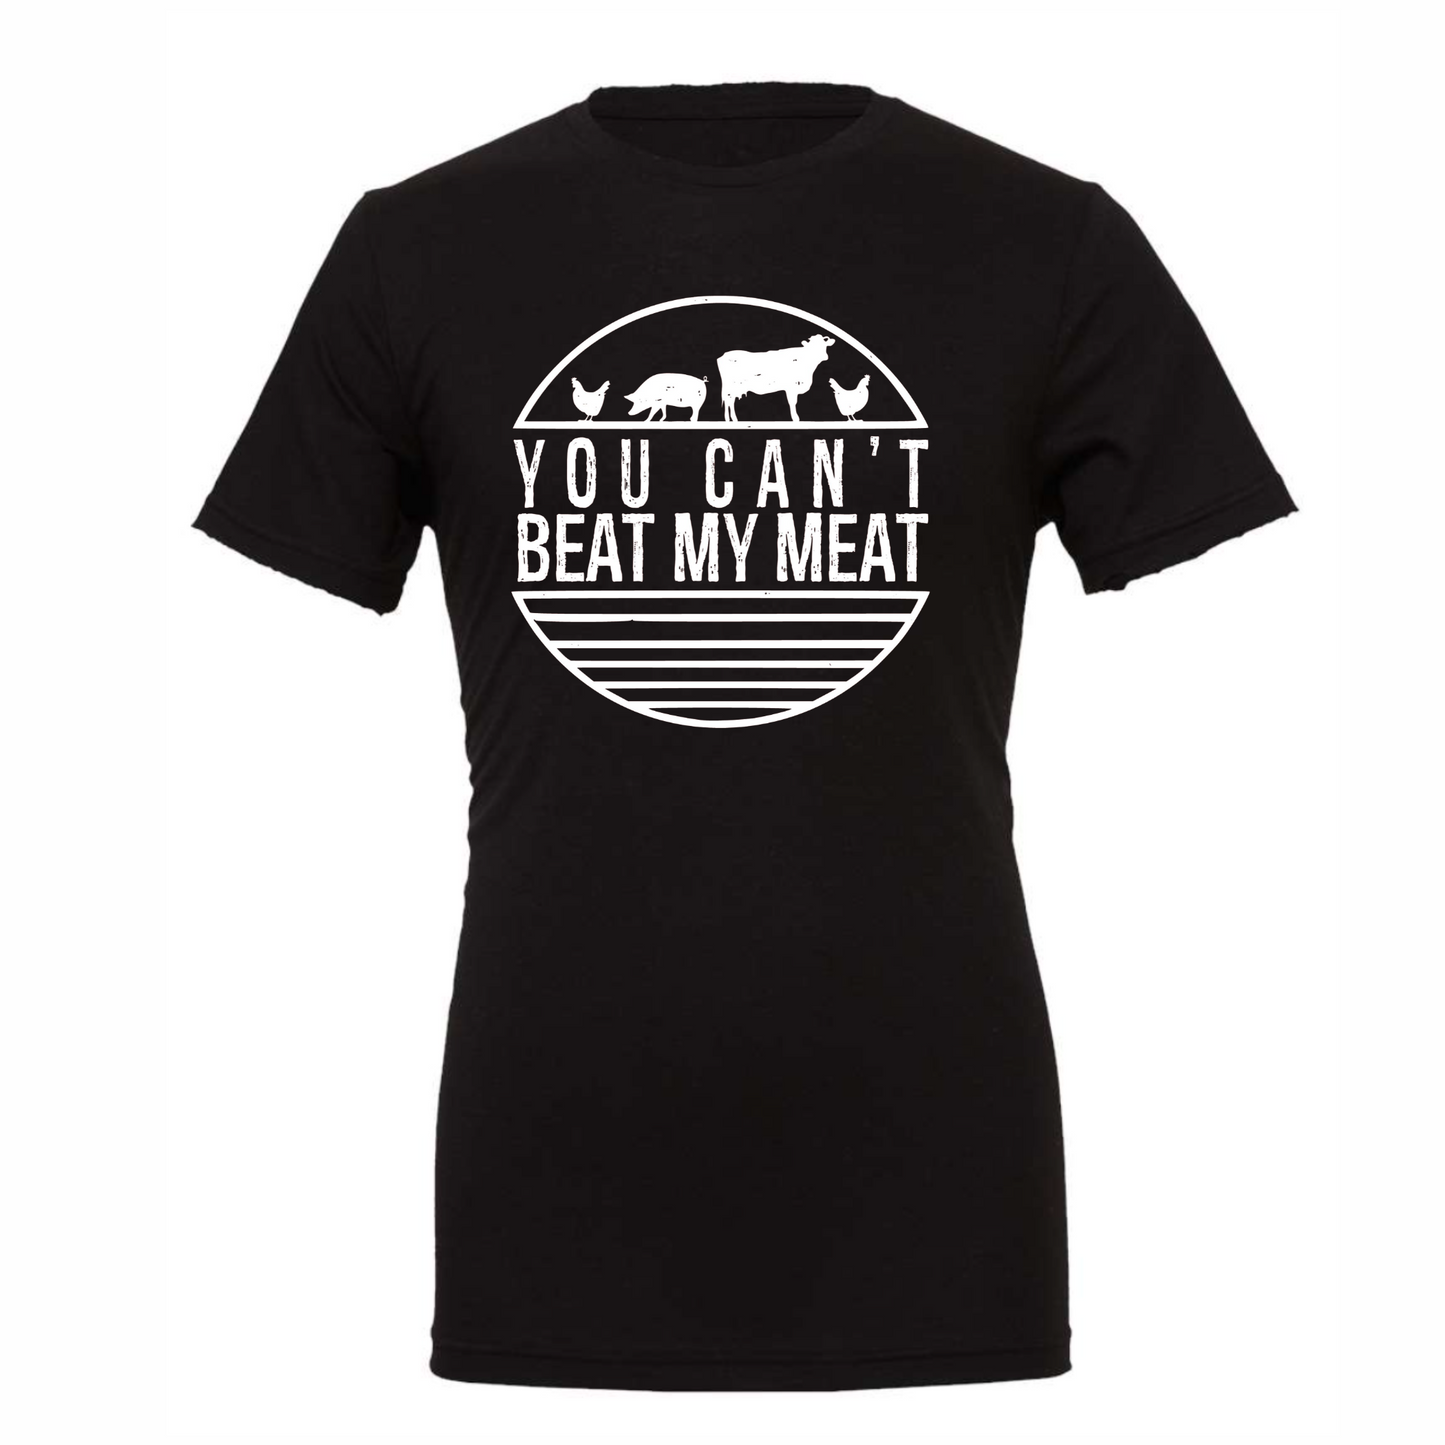 You Can't Beat My Meat Black Graphic T-Shirt with a circular white design with the saying "you can't beat my meat" saying on it, chickens, a pig and cow on the top with lines enclosing the circle on the bottom. This is the front view of the shirt.